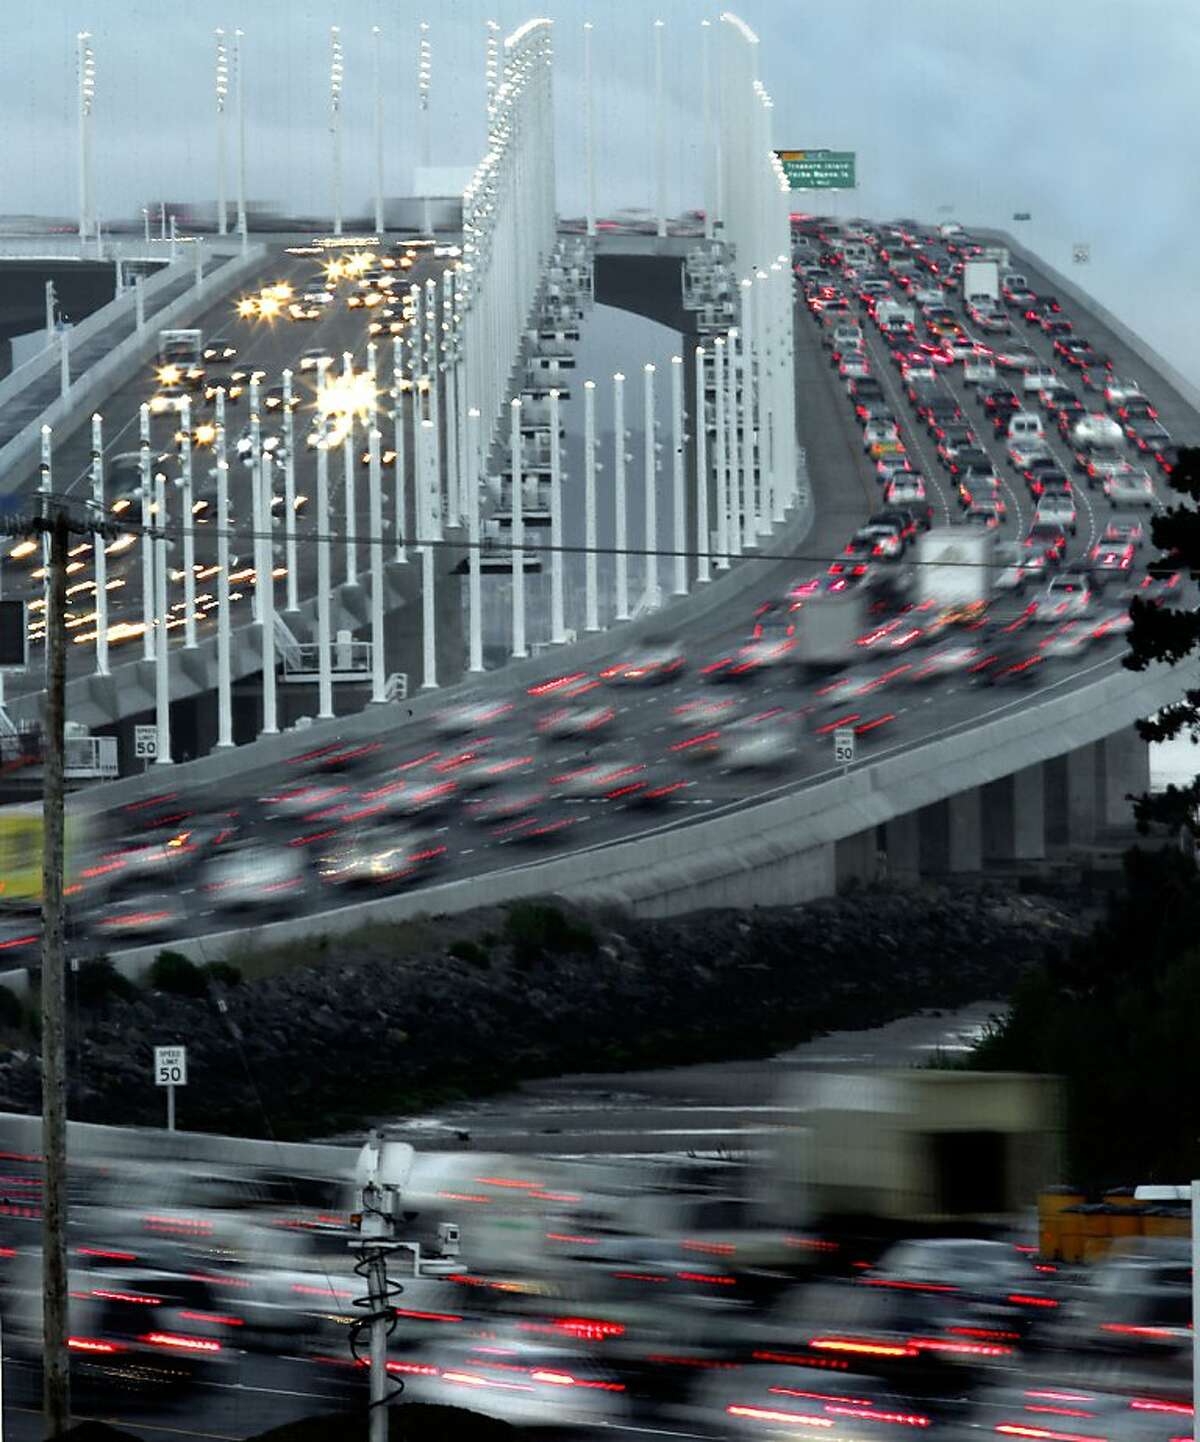 The morning commute in full swing as motorists make their way east and west bound across the roadway, in Oakland, Calif. on Tuesday Sept. 3, 2013, after the new eastern span of the Bay Bridge opened late last evening to traffic.